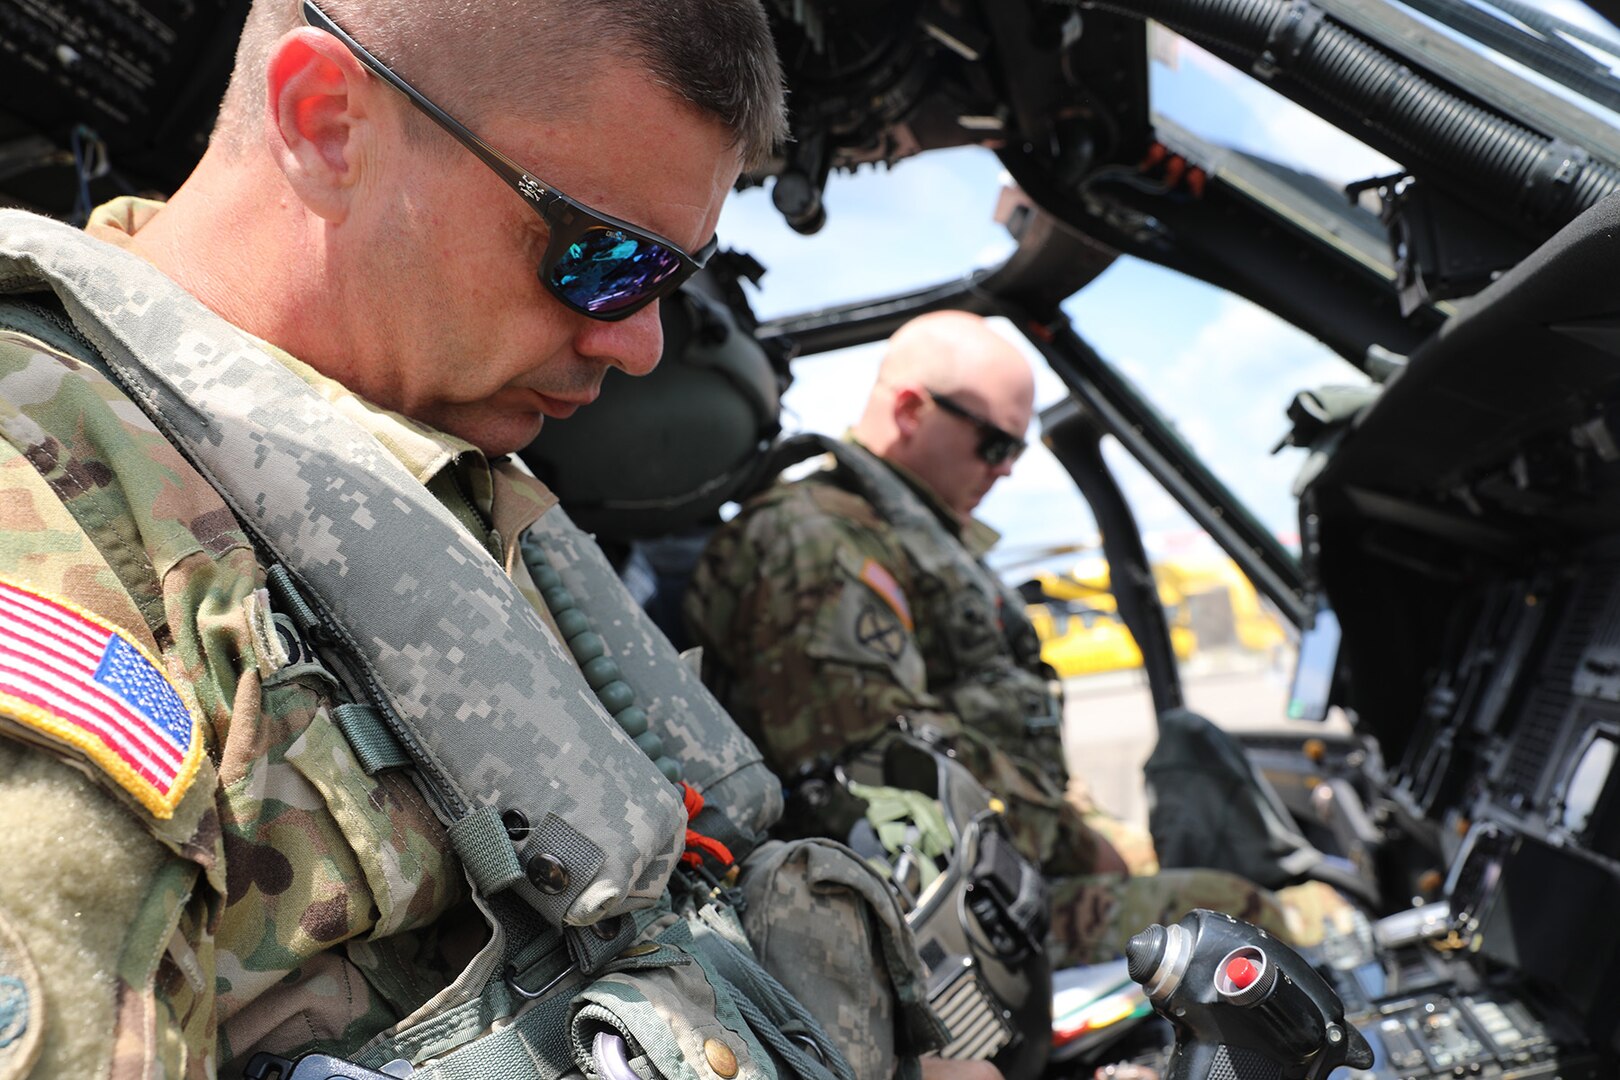 Louisiana National Guardsmen Chief Warrant Officer 3 Cody Davis (left) and Chief Warrant Officer 3 Ronald Cole (right), UH-60 Black Hawk helicopter pilots with the 2-238th General Support Aviation Battalion from Pineville, Louisiana, prepare for search and rescue missions in southeast Louisiana after Hurricane Ida, Sept. 3, 2021.